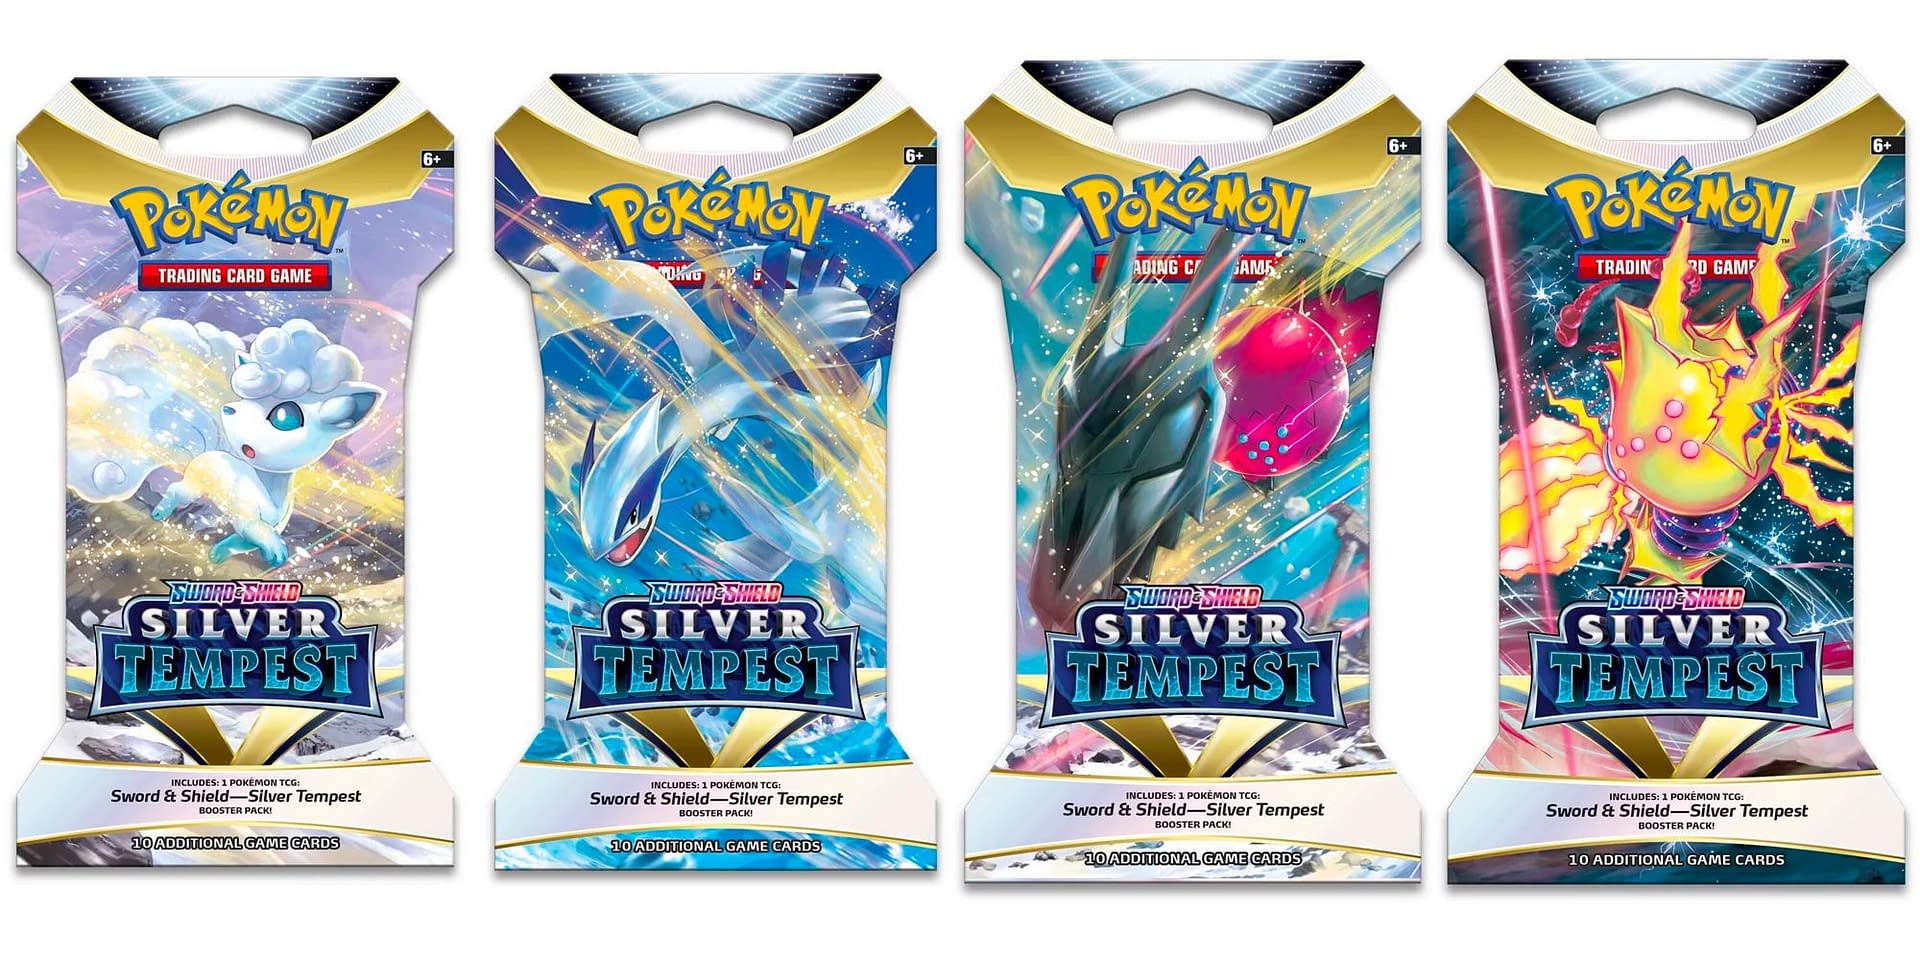 Here's What The Pokémon TCG Center: Silver Tempest ETB Looks Like